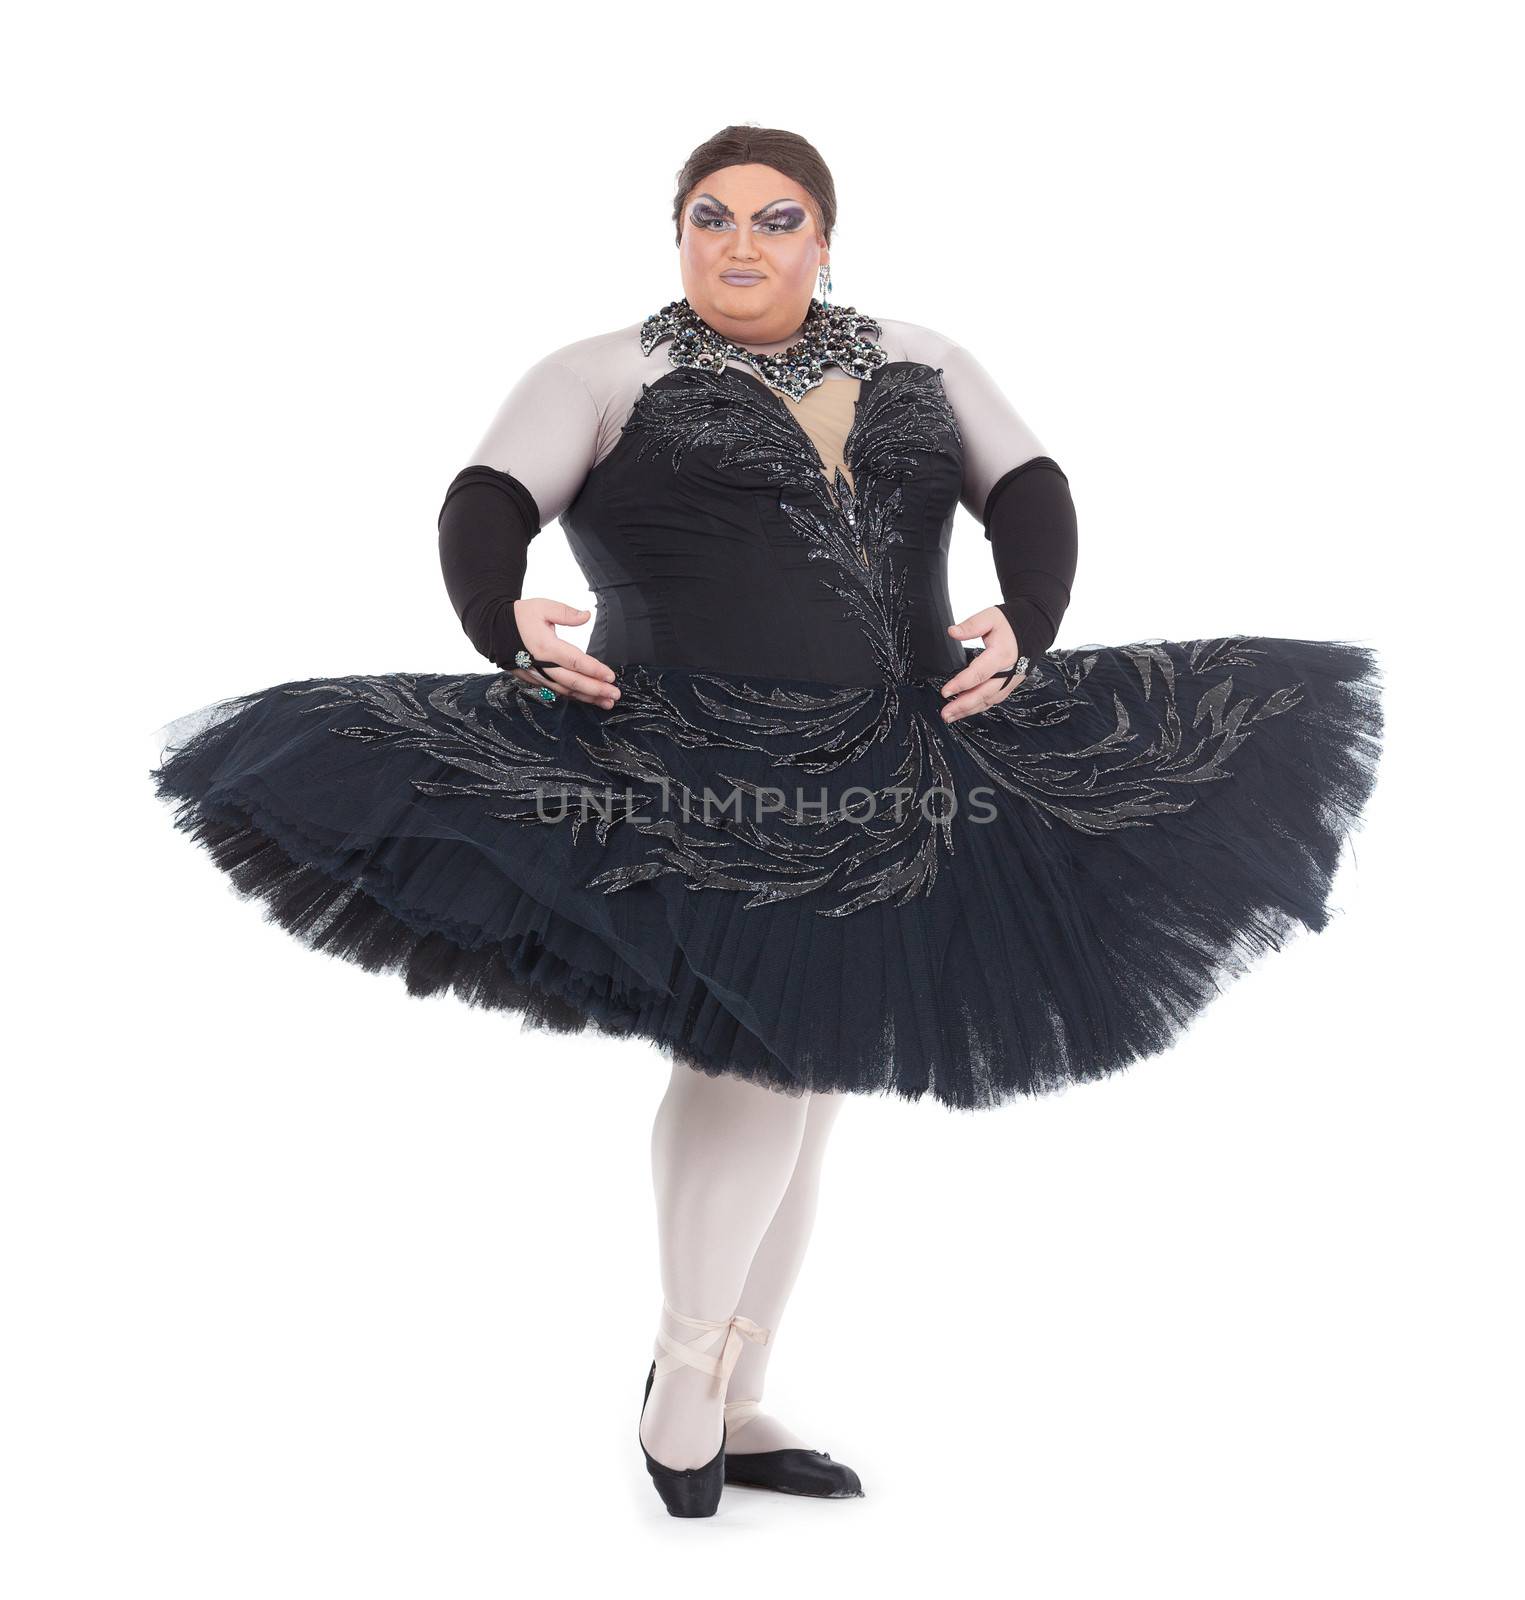 Overweight drag queen dancing in a tutu nimbly balancing on tiptoe with his foot raised in a fun caricature of a female ballet dancer, on white